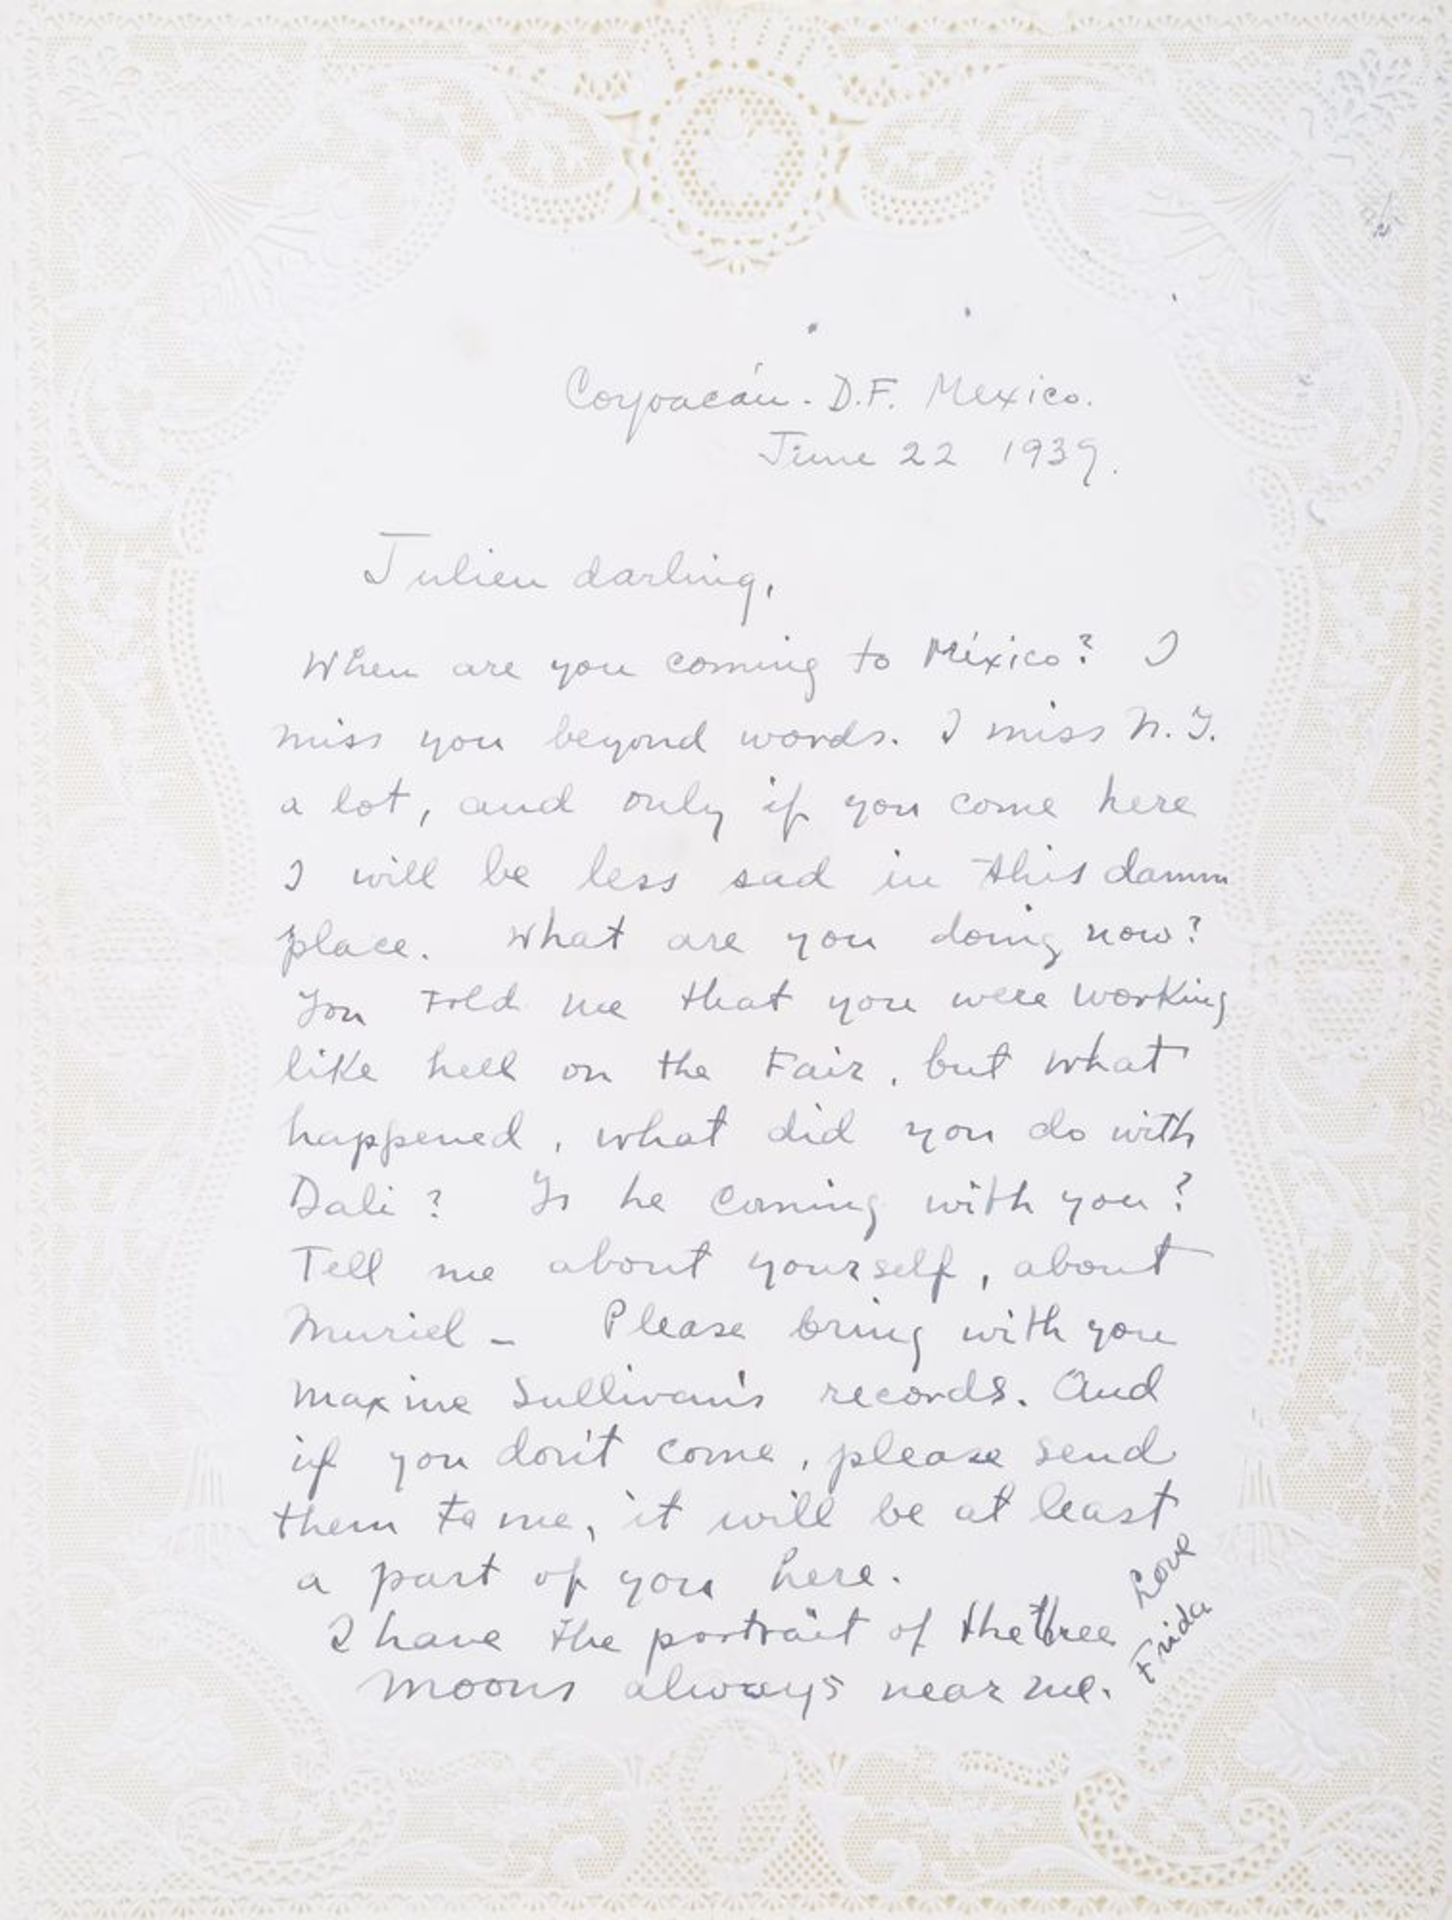 KAHLO FRIDA (1907-1954) - Autograph Letter Dated and Signed. A.L.S. “Frida”, [...]